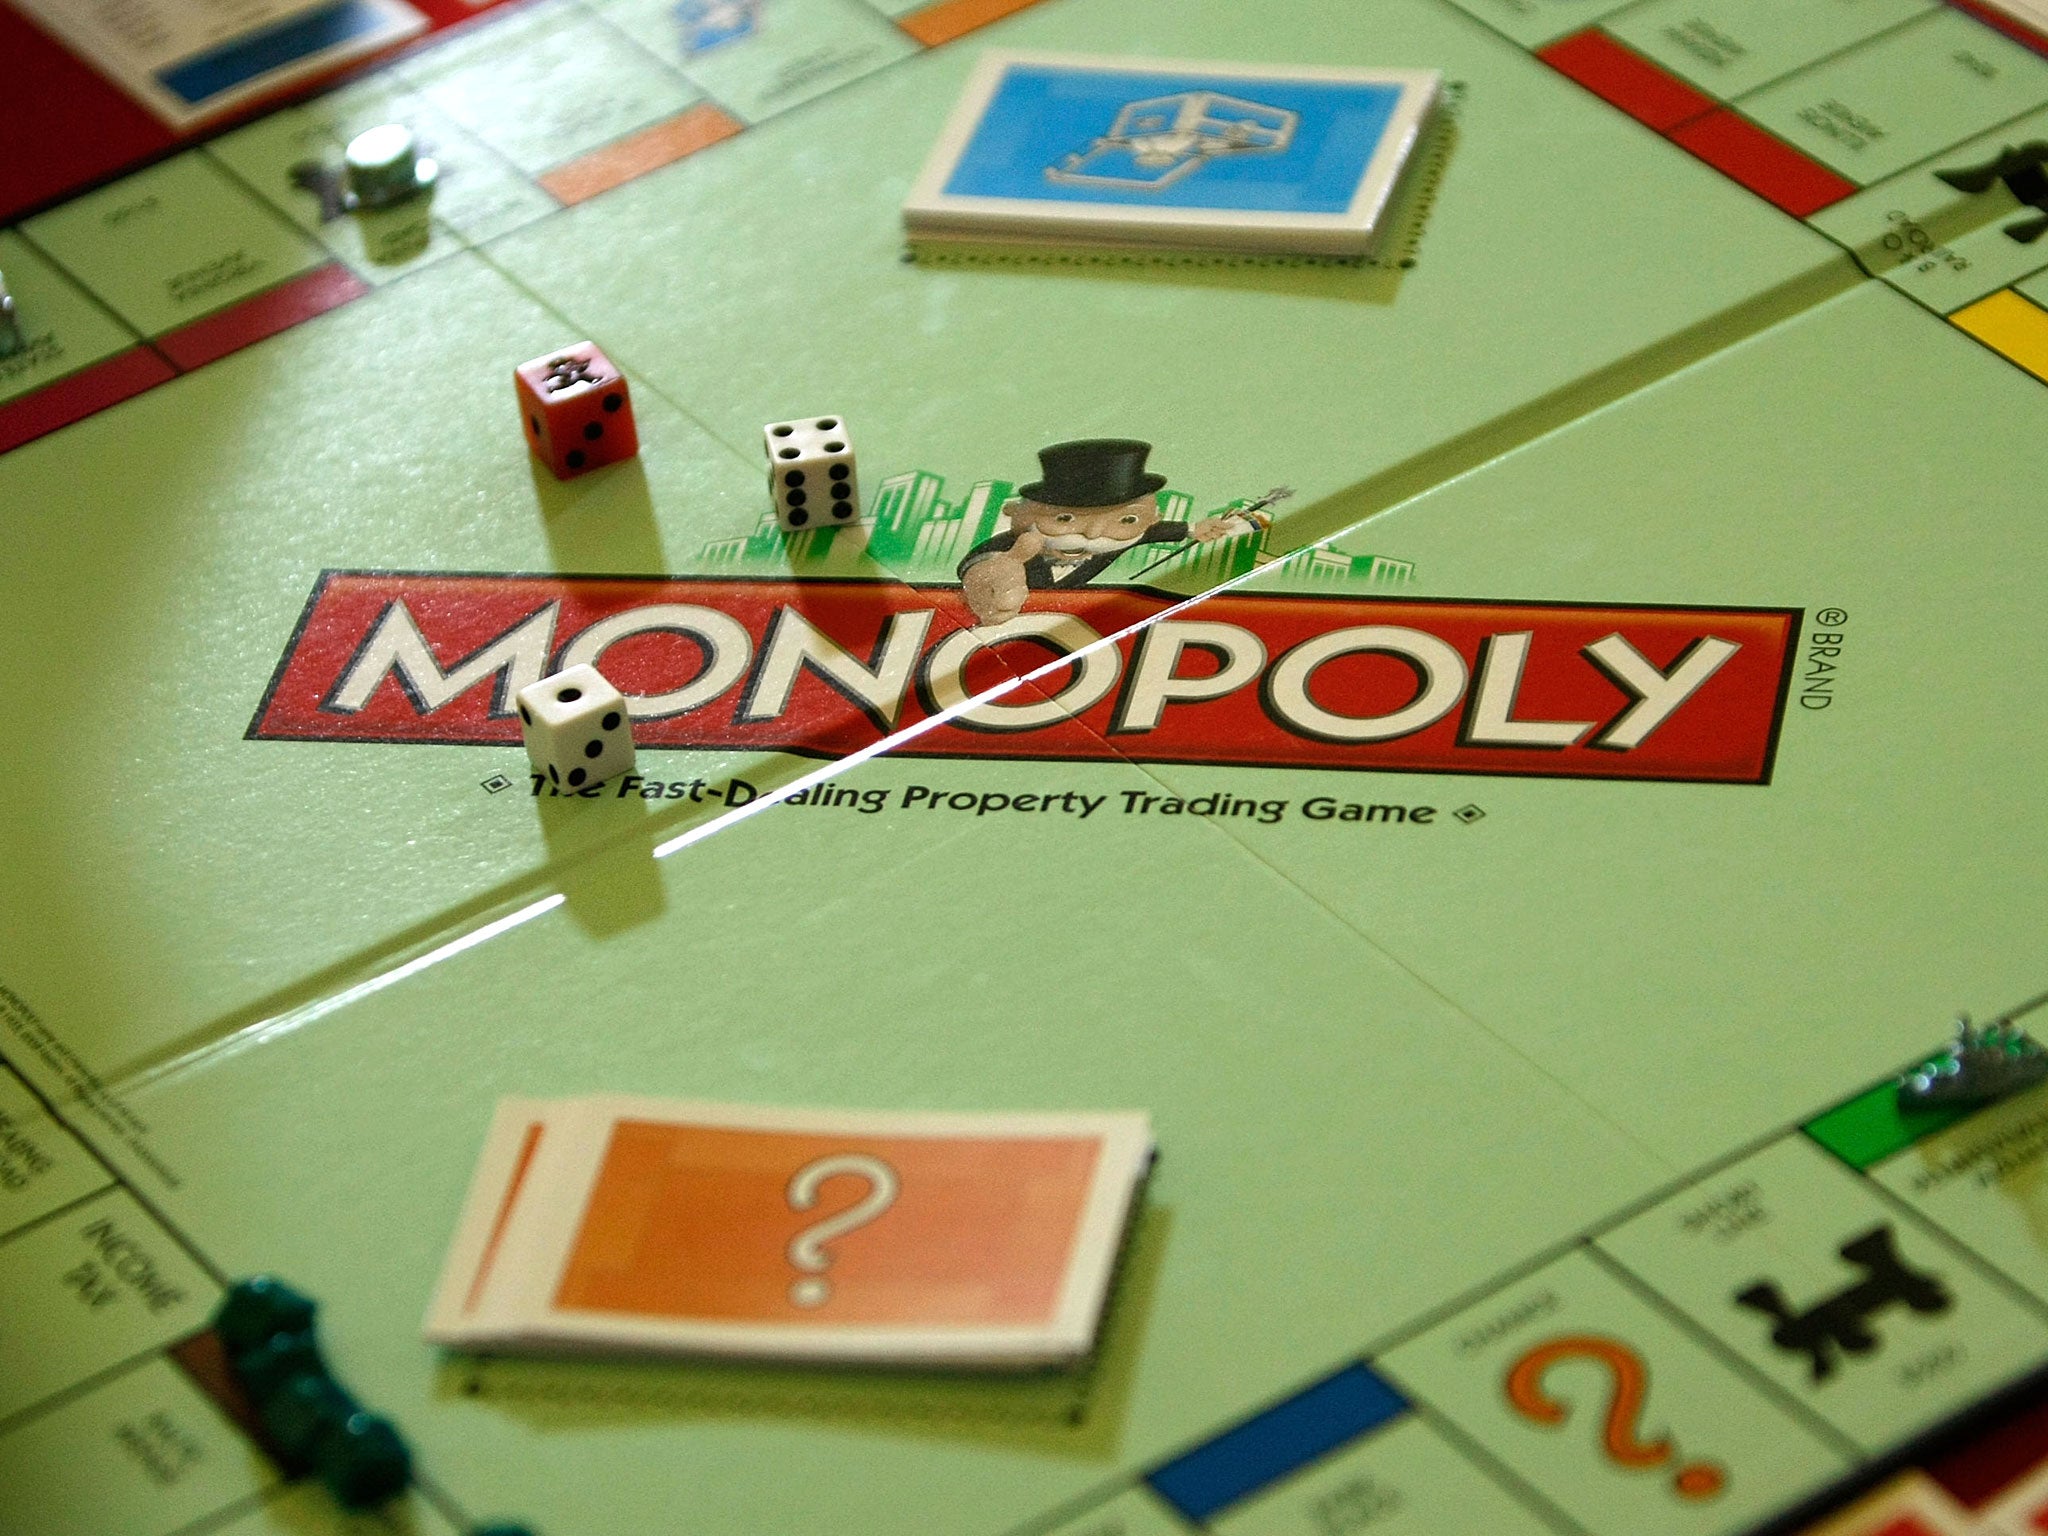 Cashing in: Donald openly hates playing Monopoly